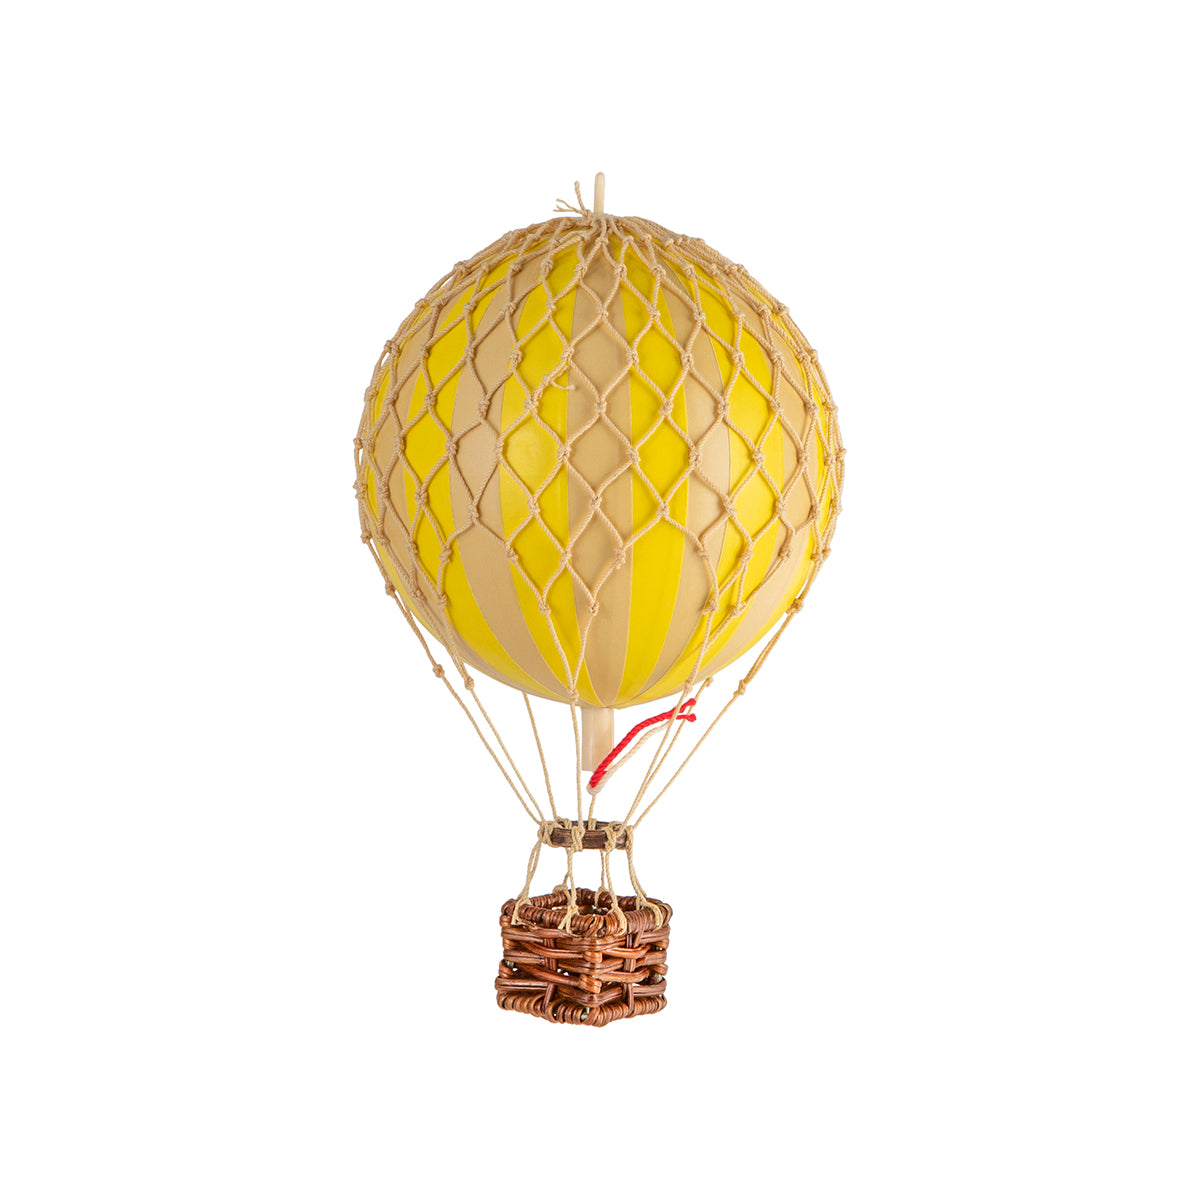 Embark on a whimsical journey aboard a Wonderen Extra Small Hot Air Balloon - Floating The Skies, with a basket, as you set off on a magical adventure among the skies filled with hot air balloons.